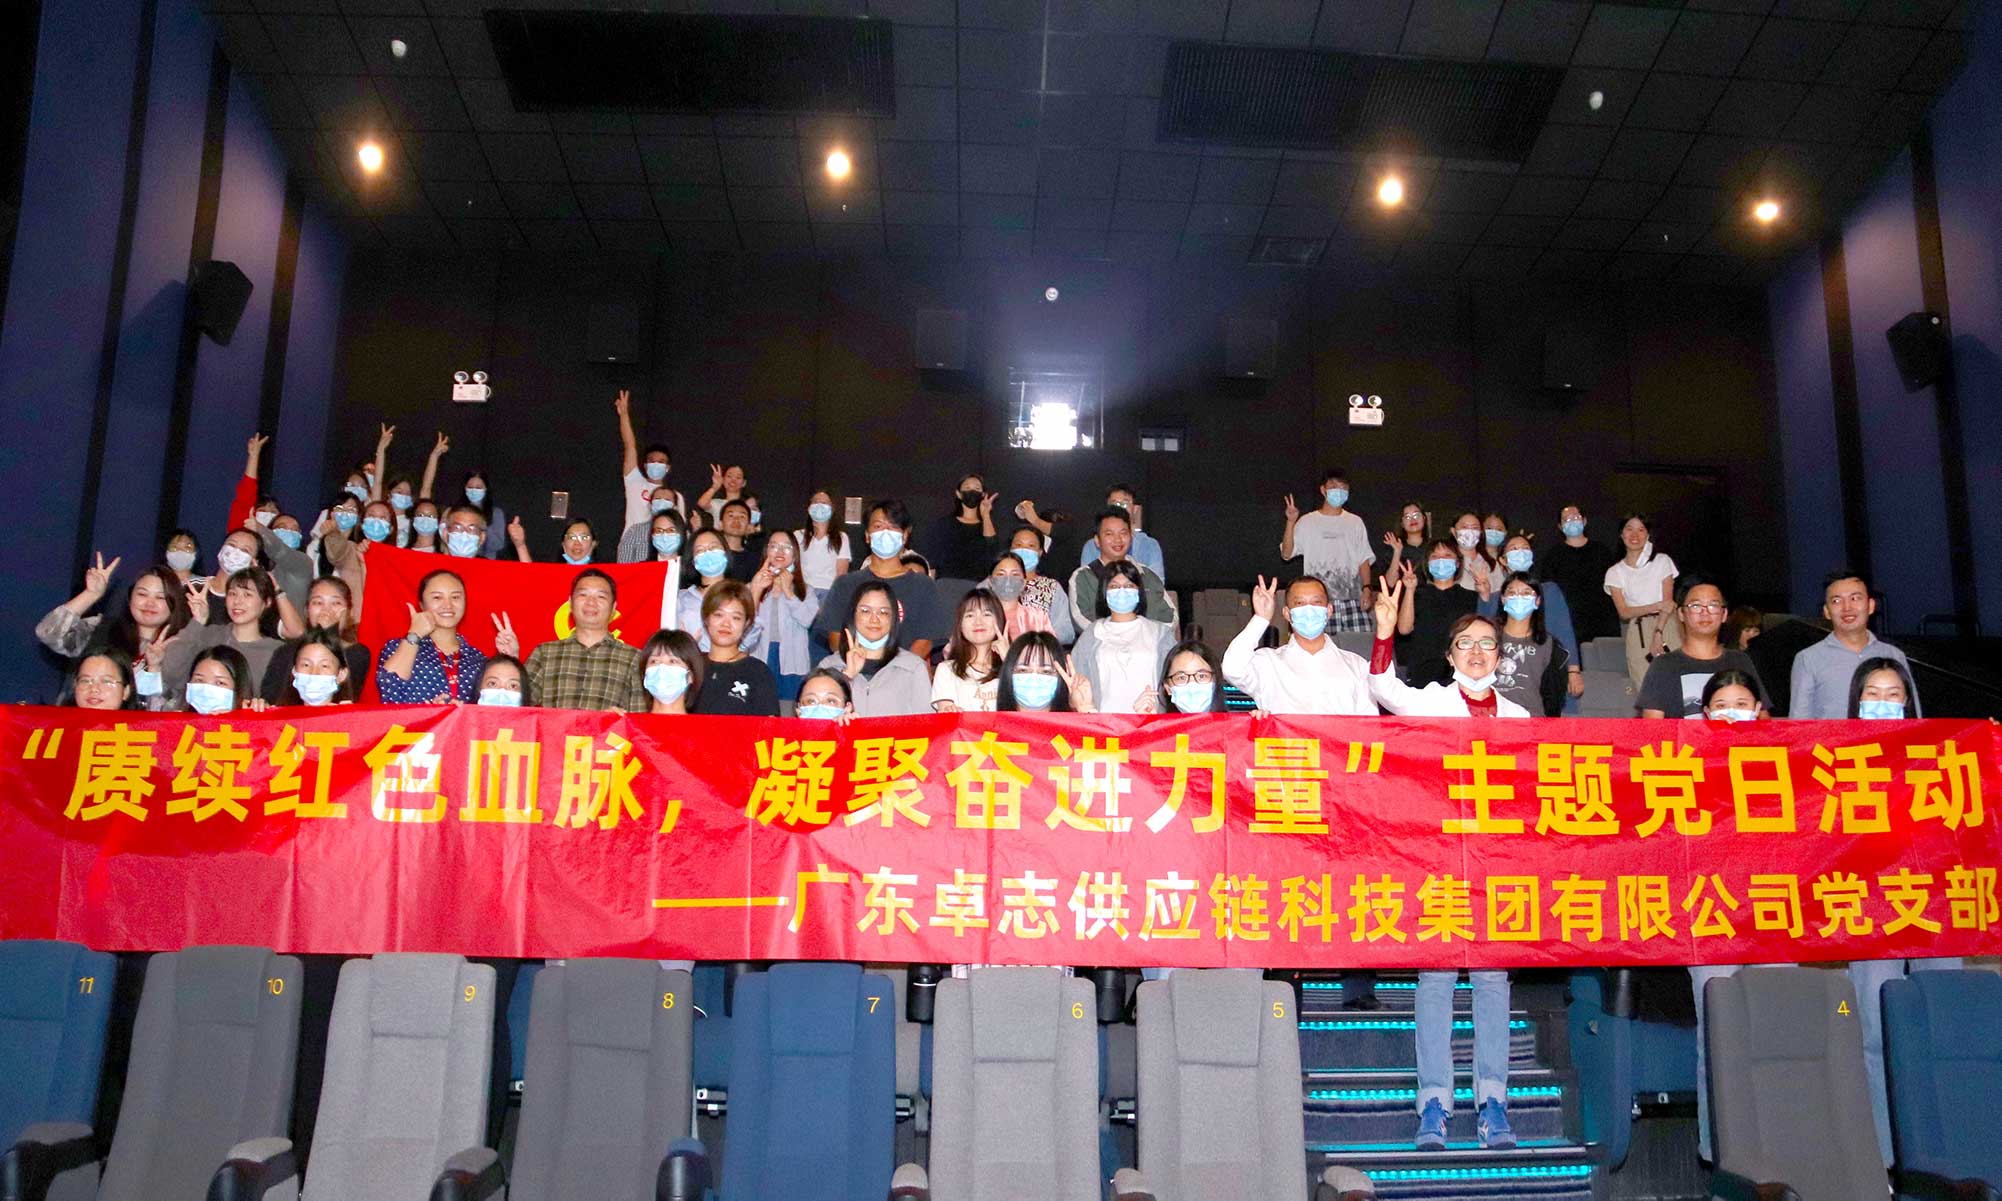 The Party Branch organized a movie screening of The Battle at Lake Changjin for both Party members and the mass